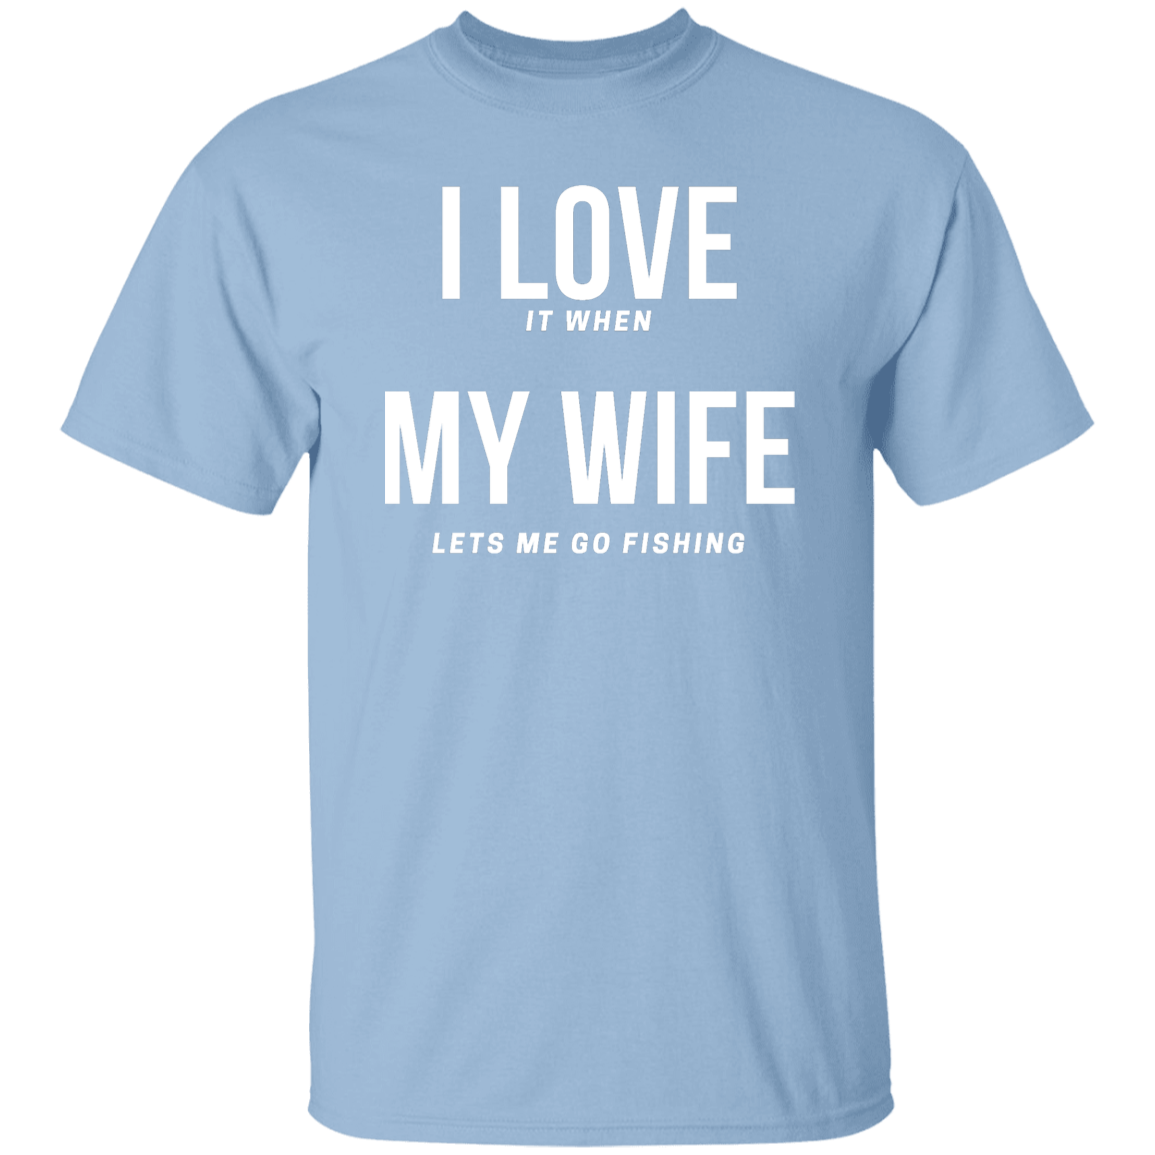 I Love My Wife. T-Shirt WI